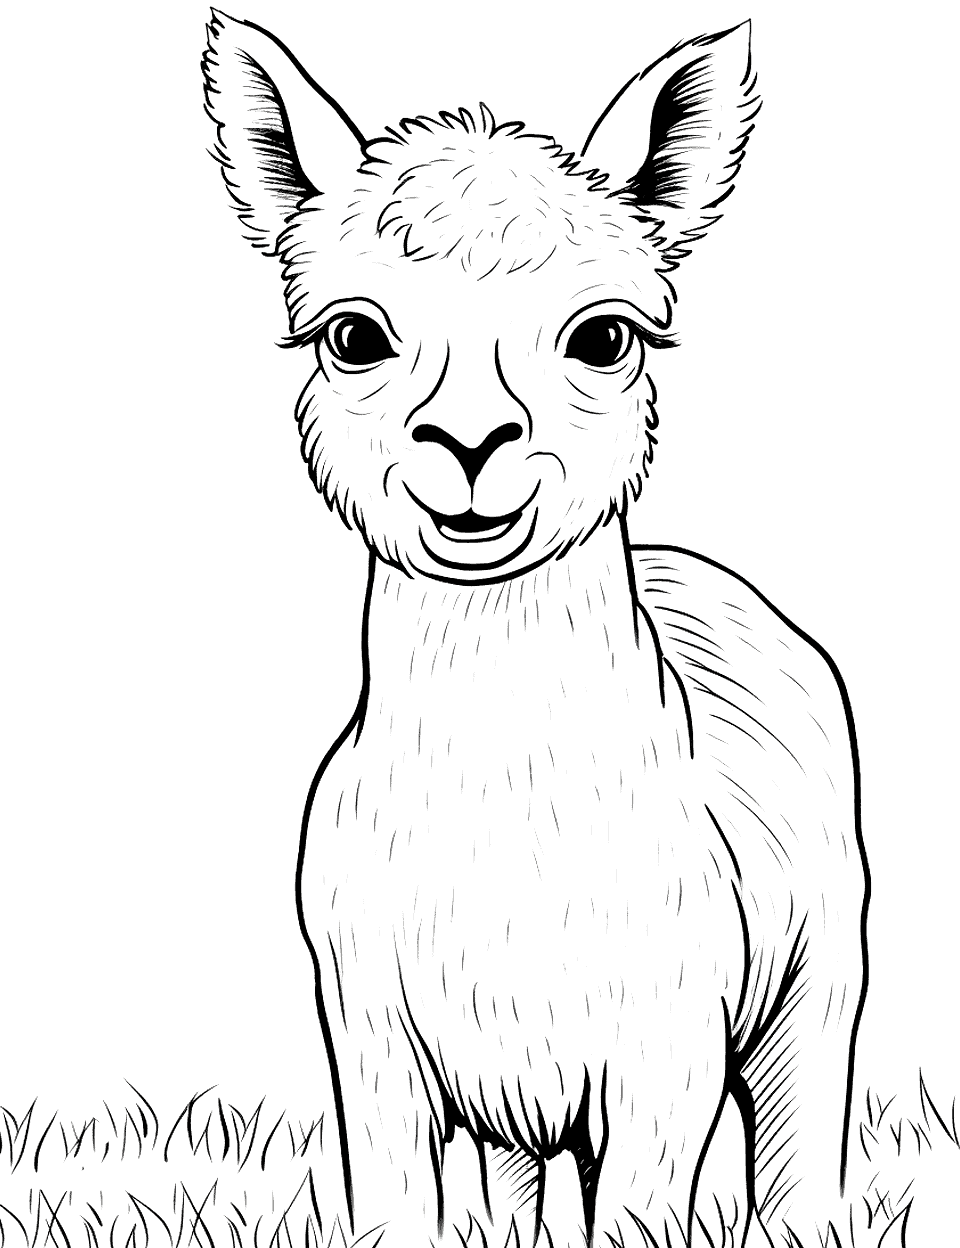 Llama Looking Curious Farm Coloring Page - A llama with a funny, curious expression.